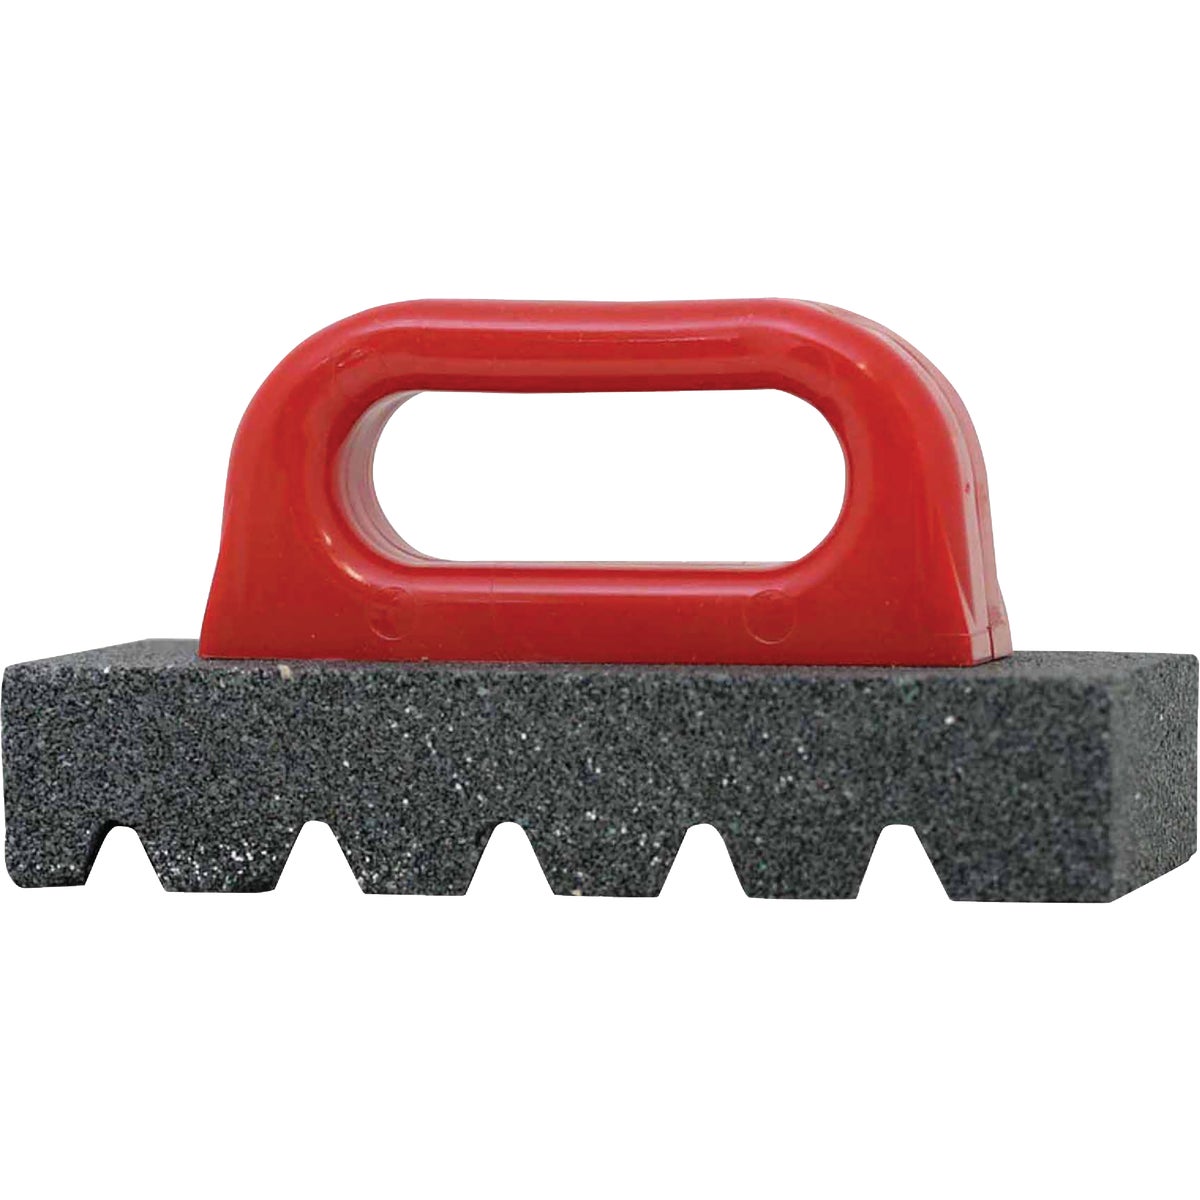 Item 322877, Coarse bricks with sturdy handle for easier use.